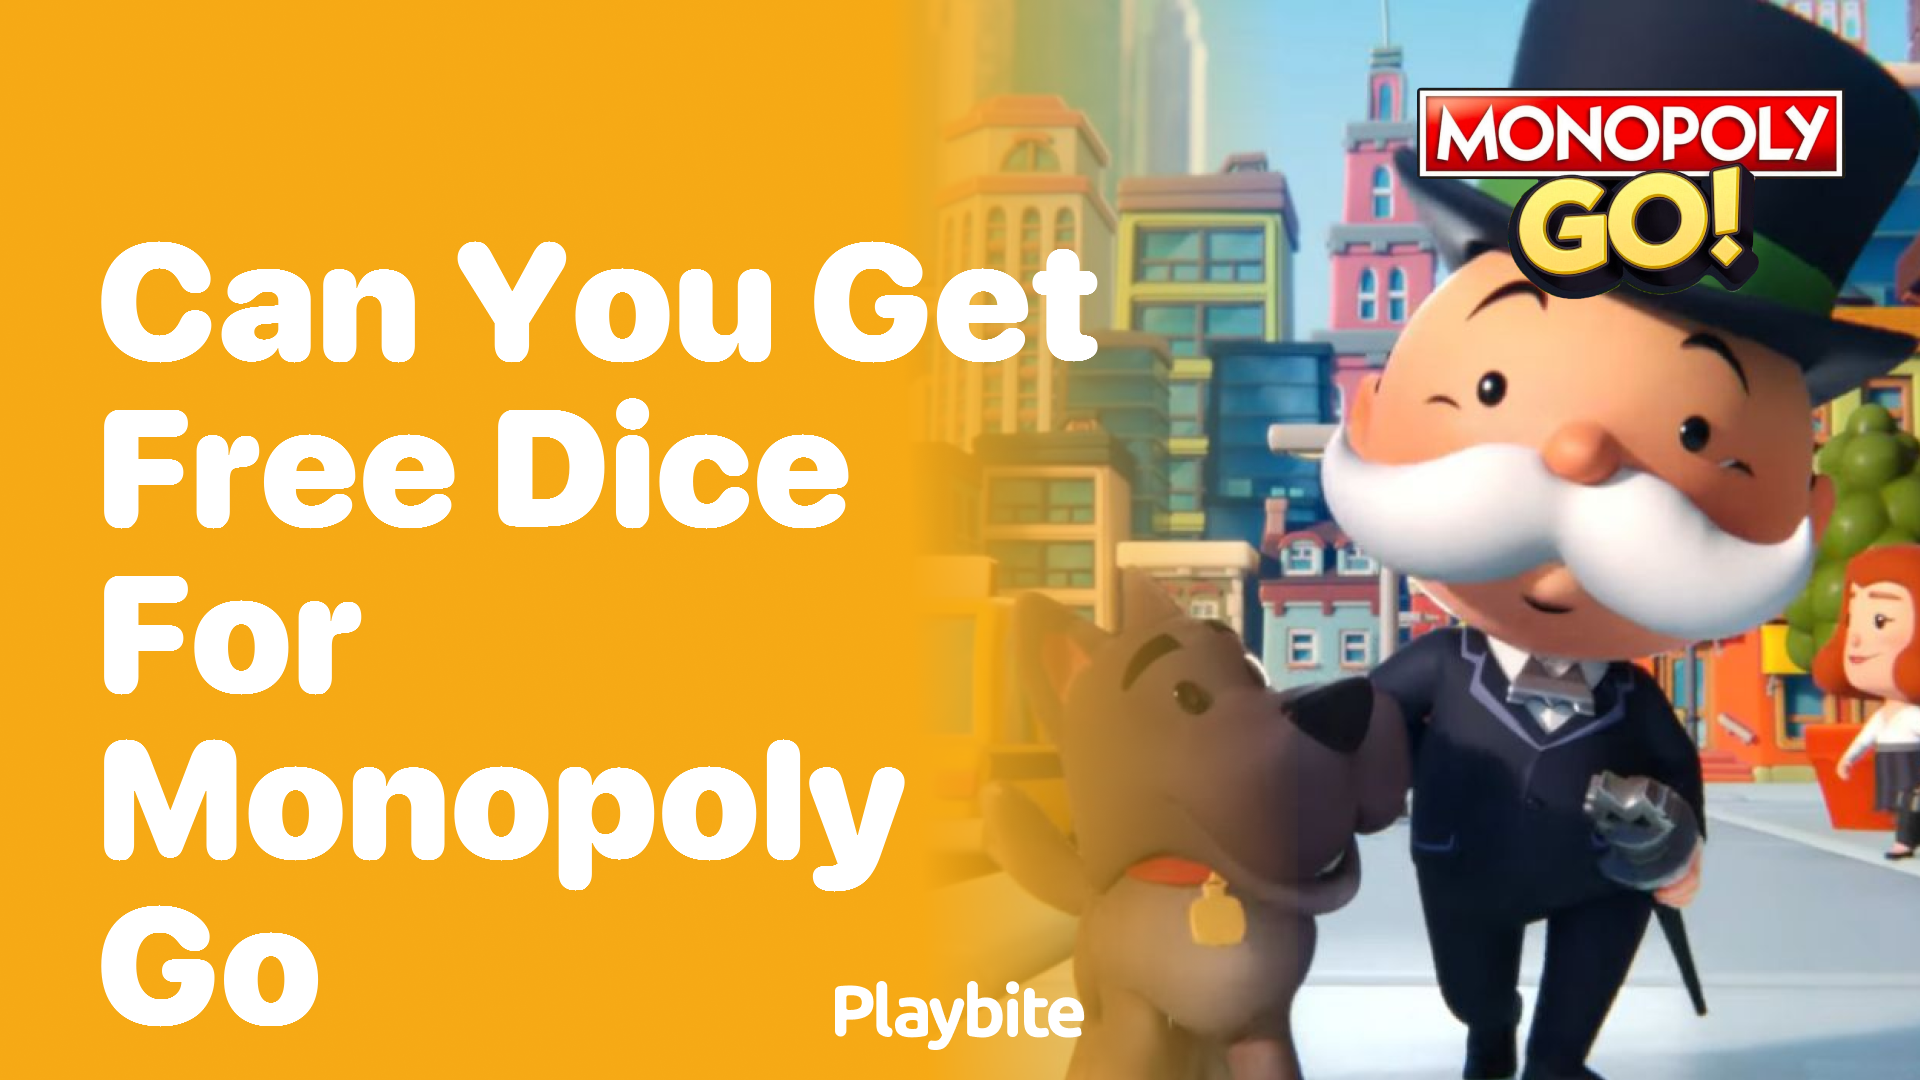 Can You Get Free Dice for Monopoly Go?